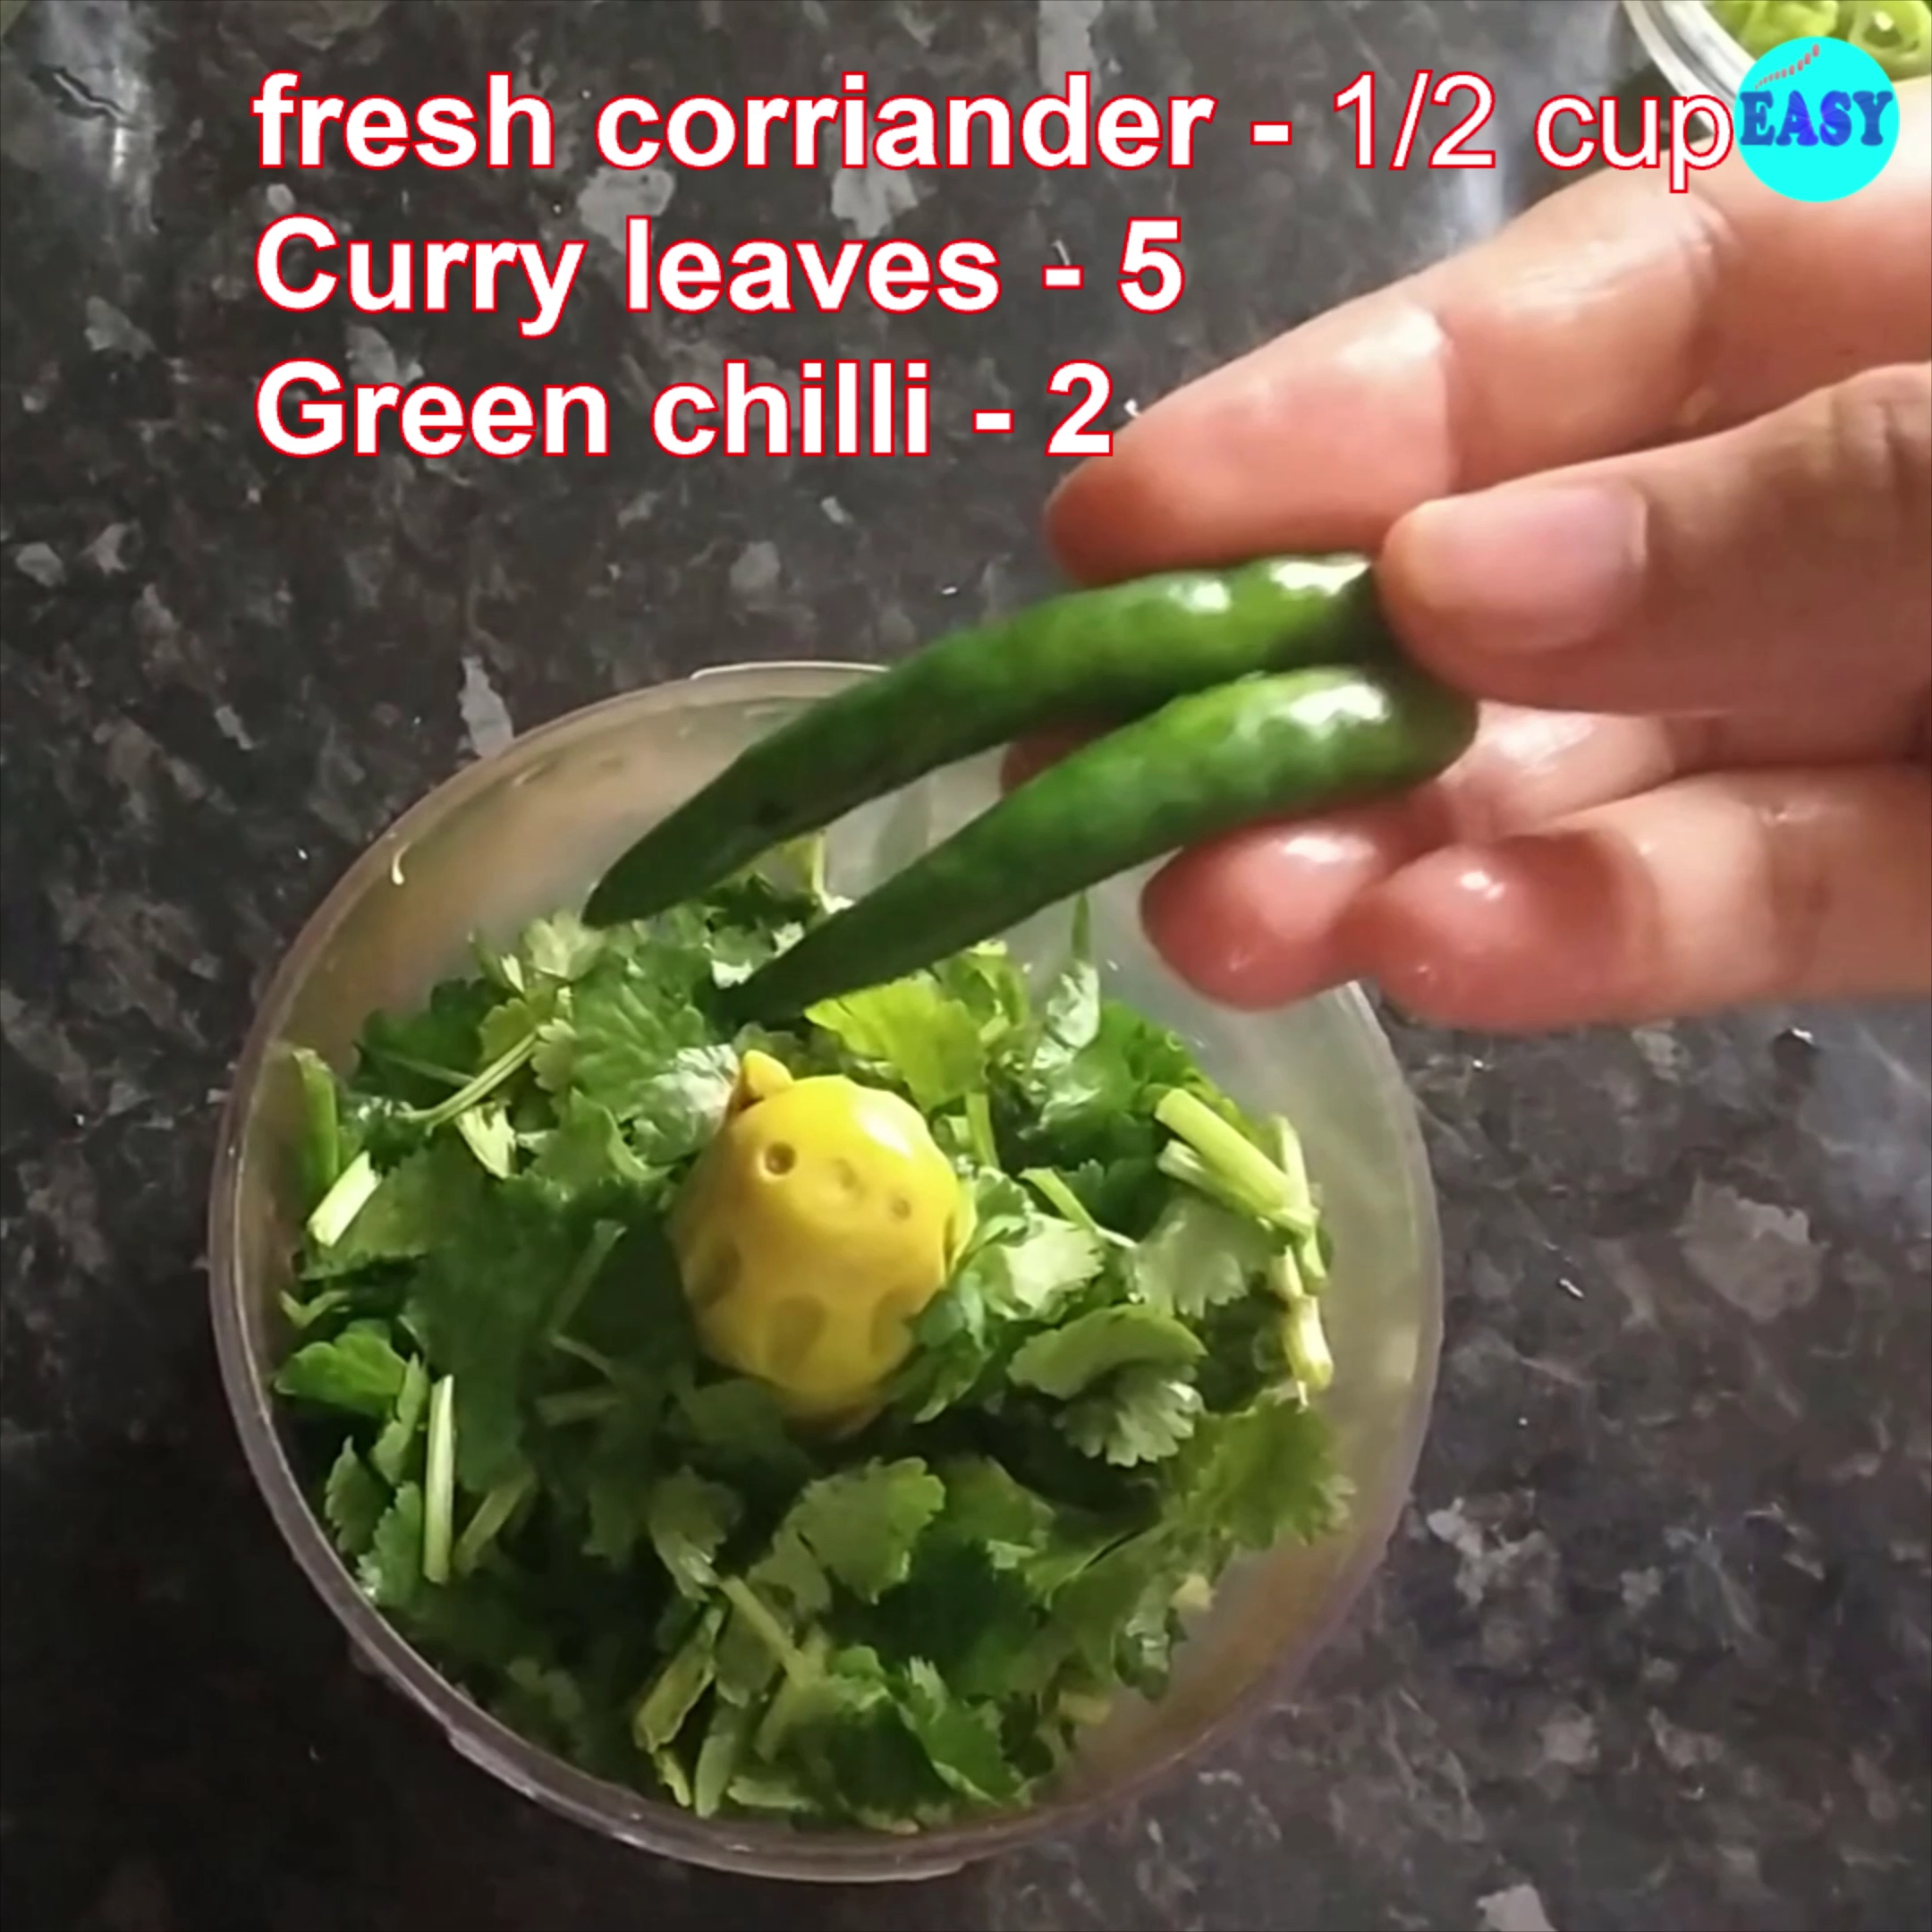 Step 2 - In a Blender add coriander leaves, curry leaves, green chilli.